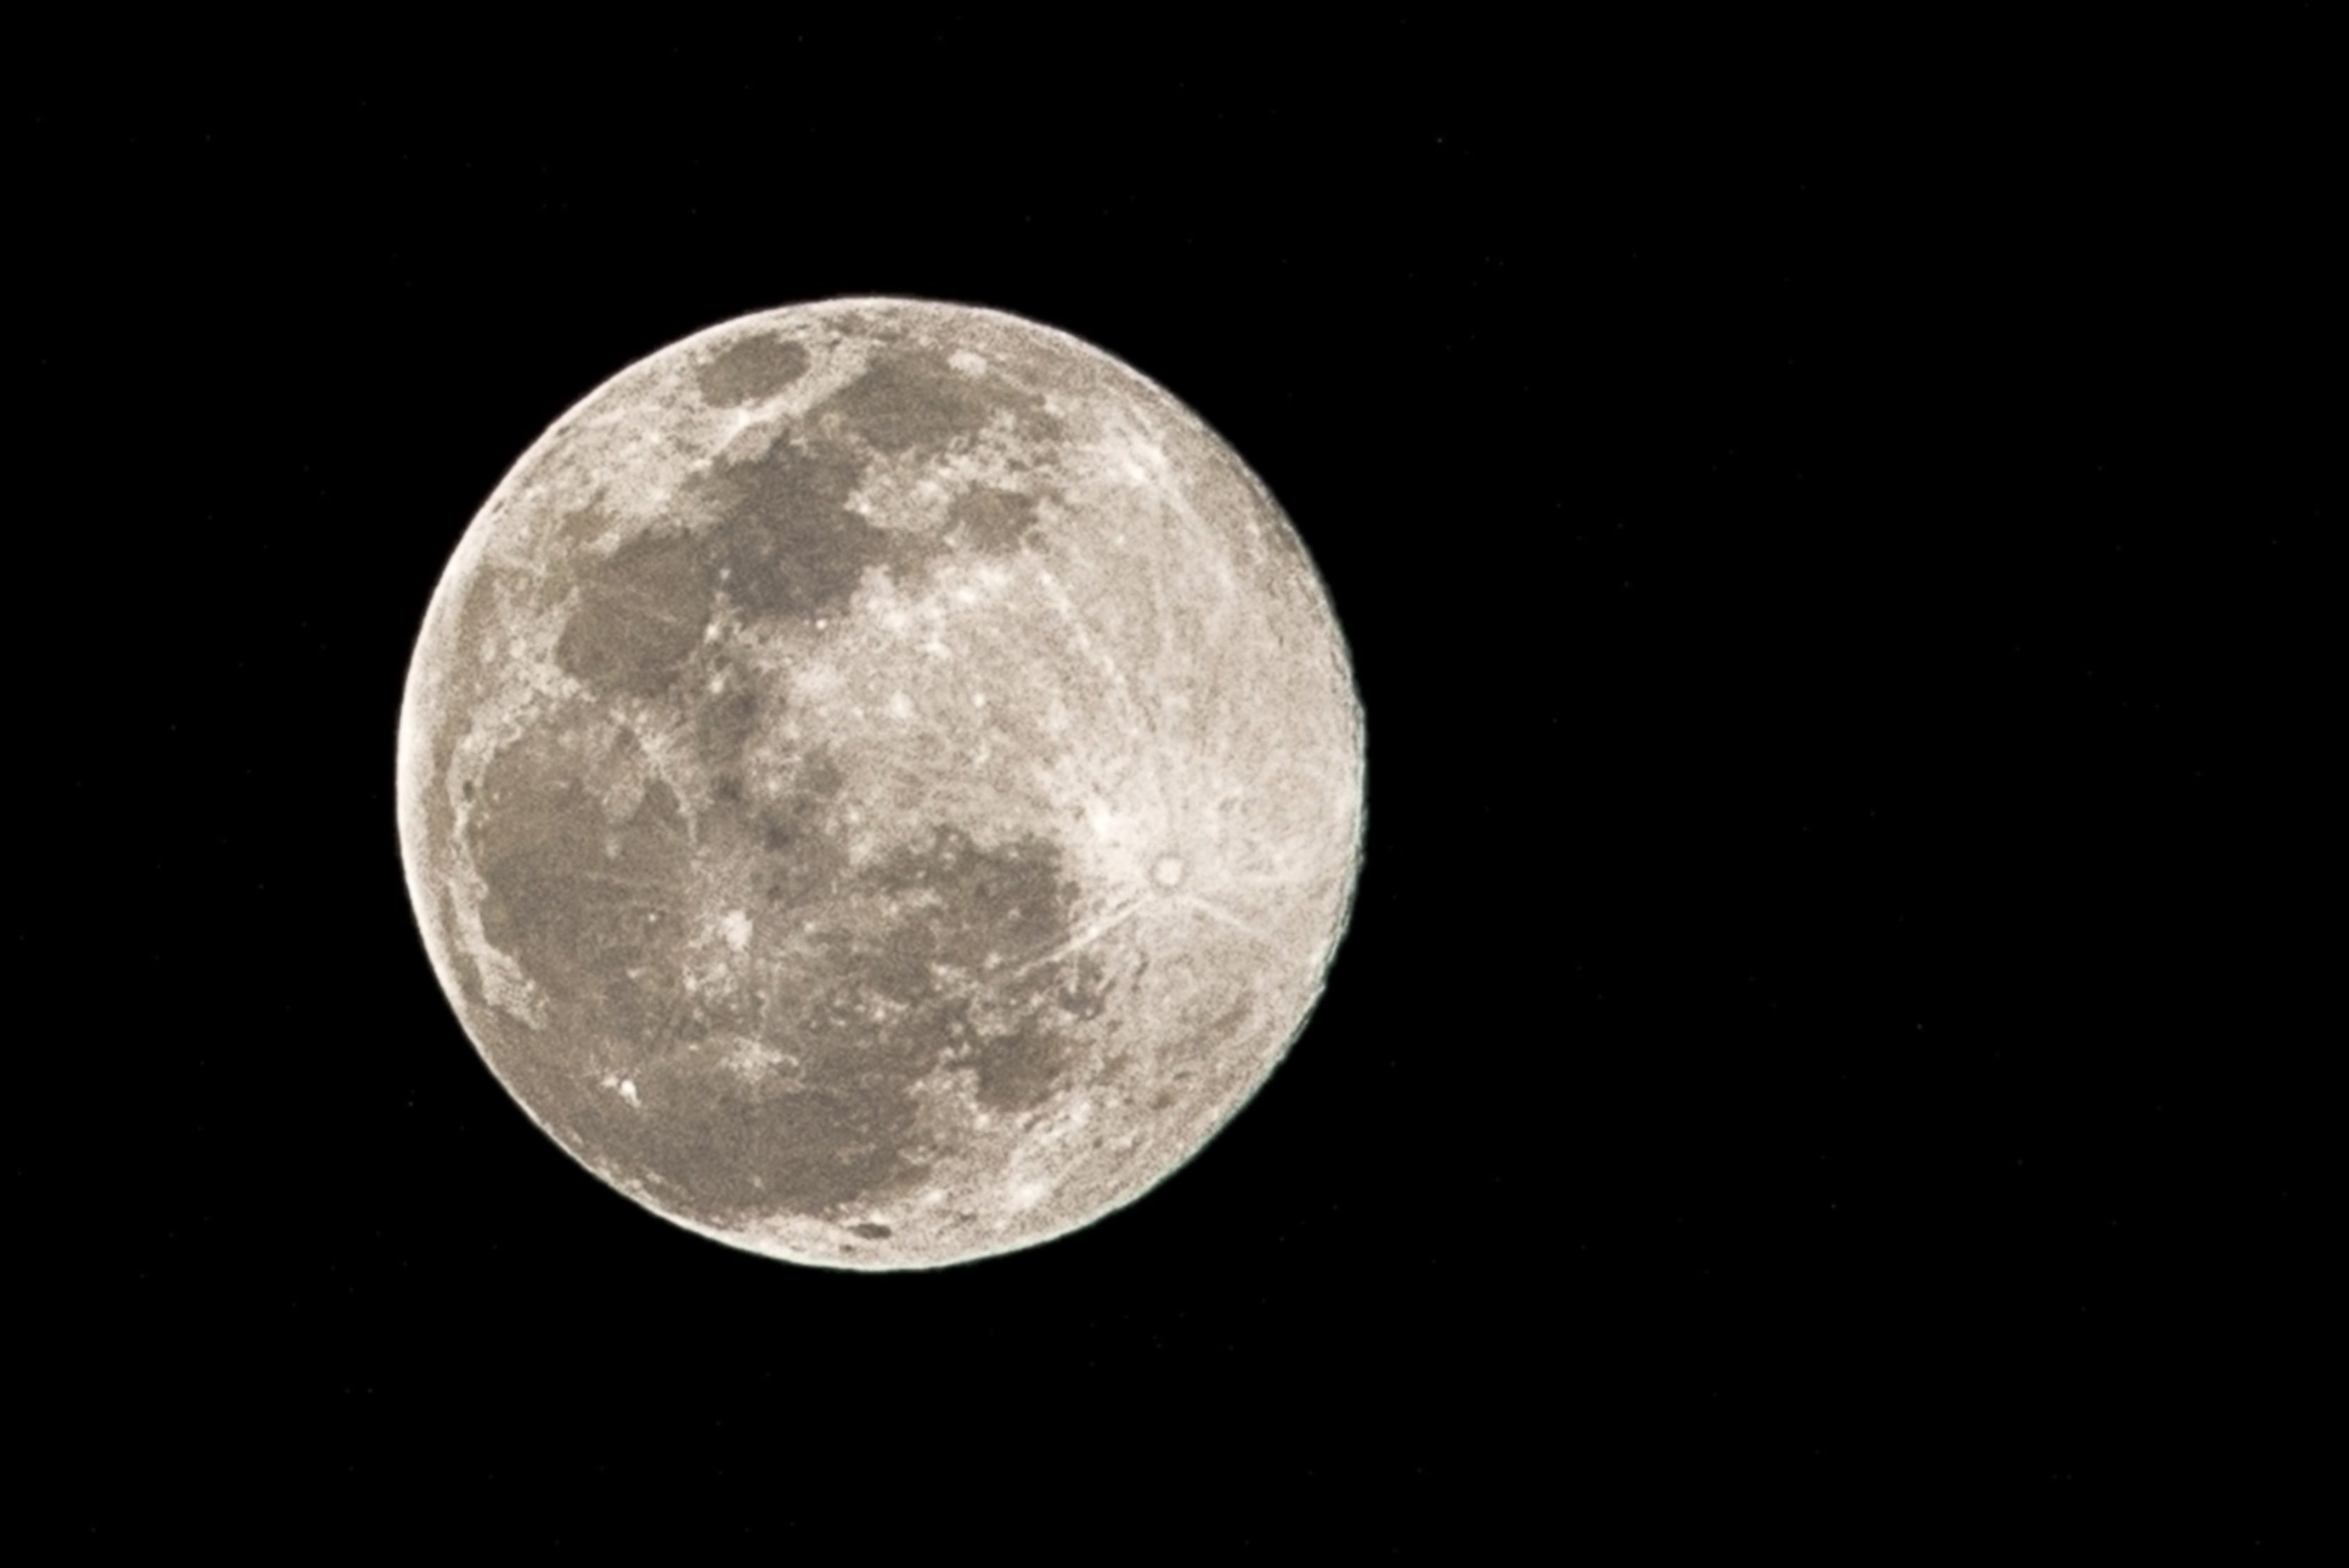 When Is July's Full Moon, the Biggest and Brightest Supermoon of the Year?